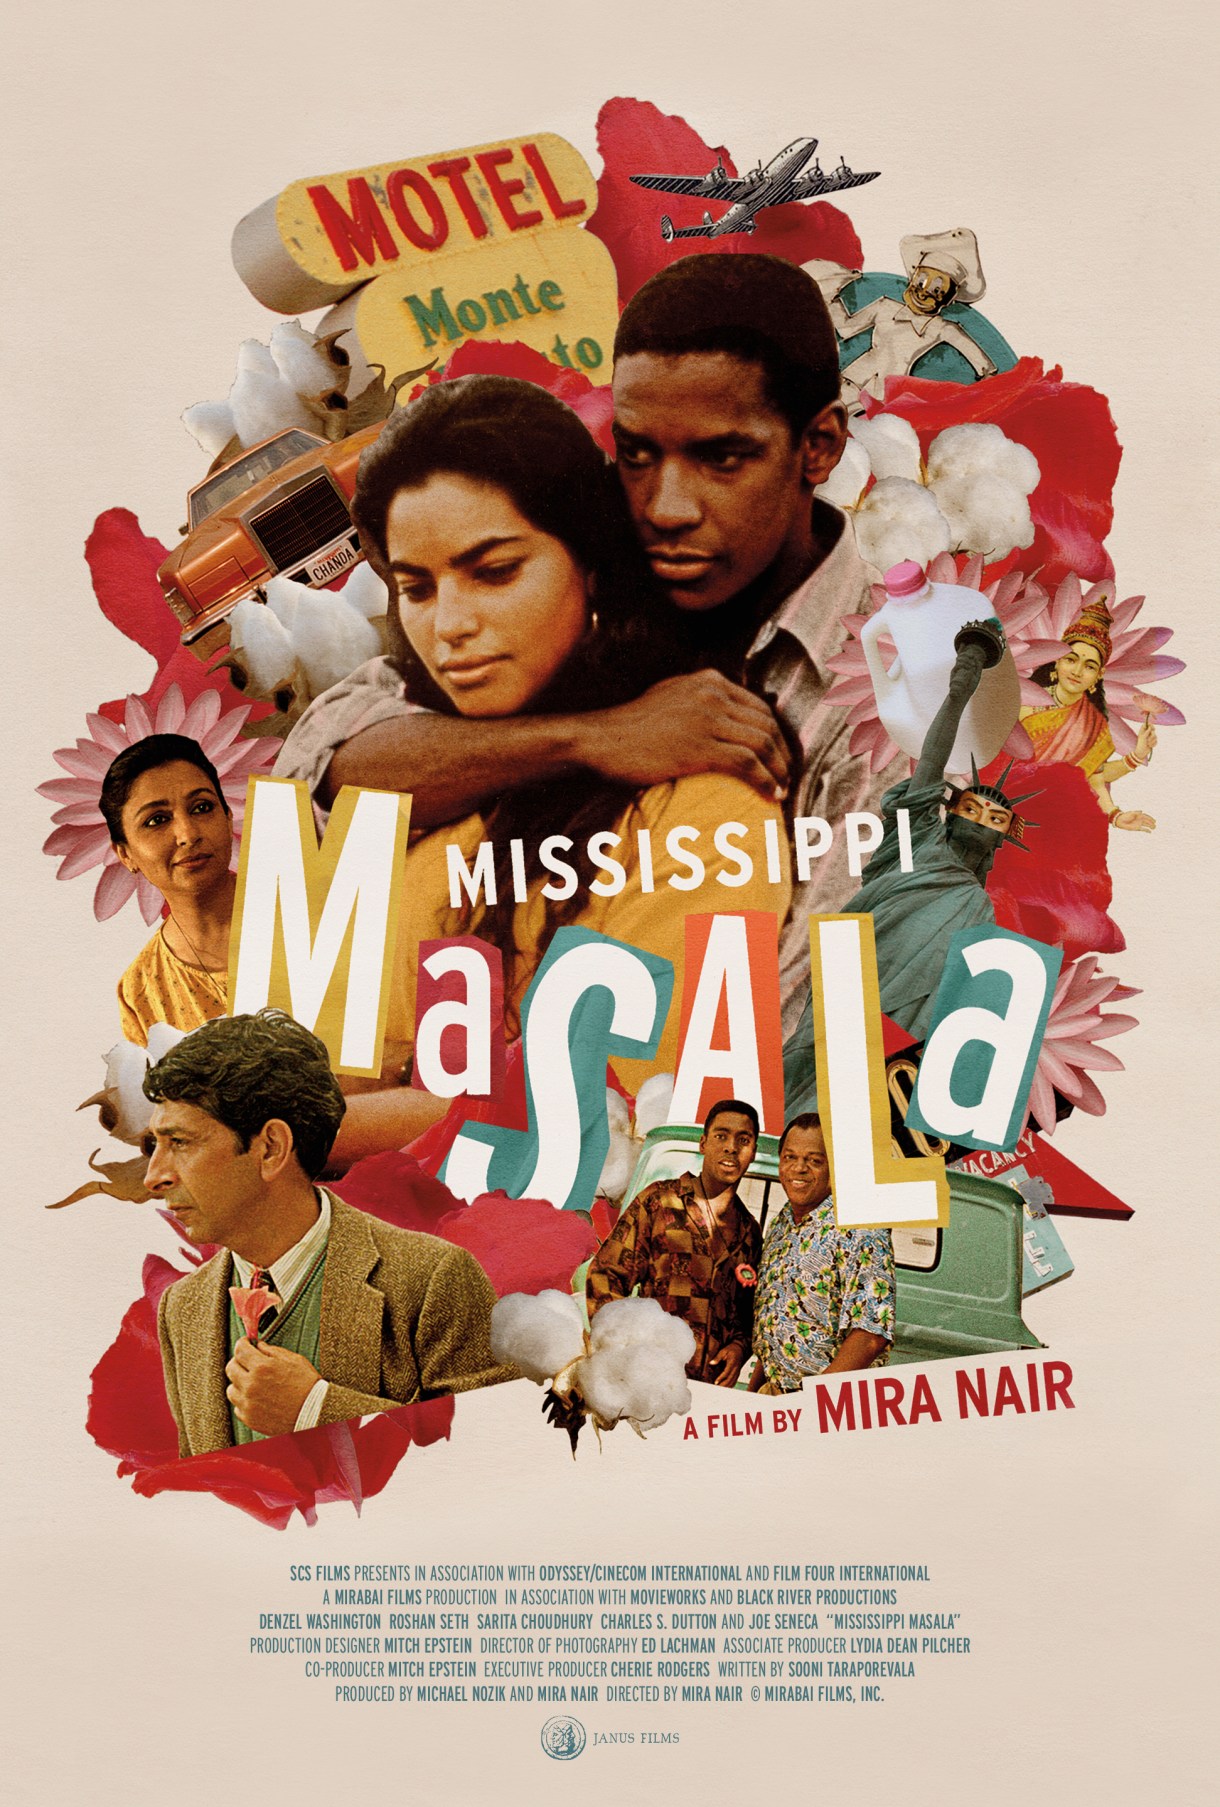 the cover of Mississippi Masala shows the two main characters played by Denzel Washington and Sarita Choudhurry in front of a colorful collage of elements from the film